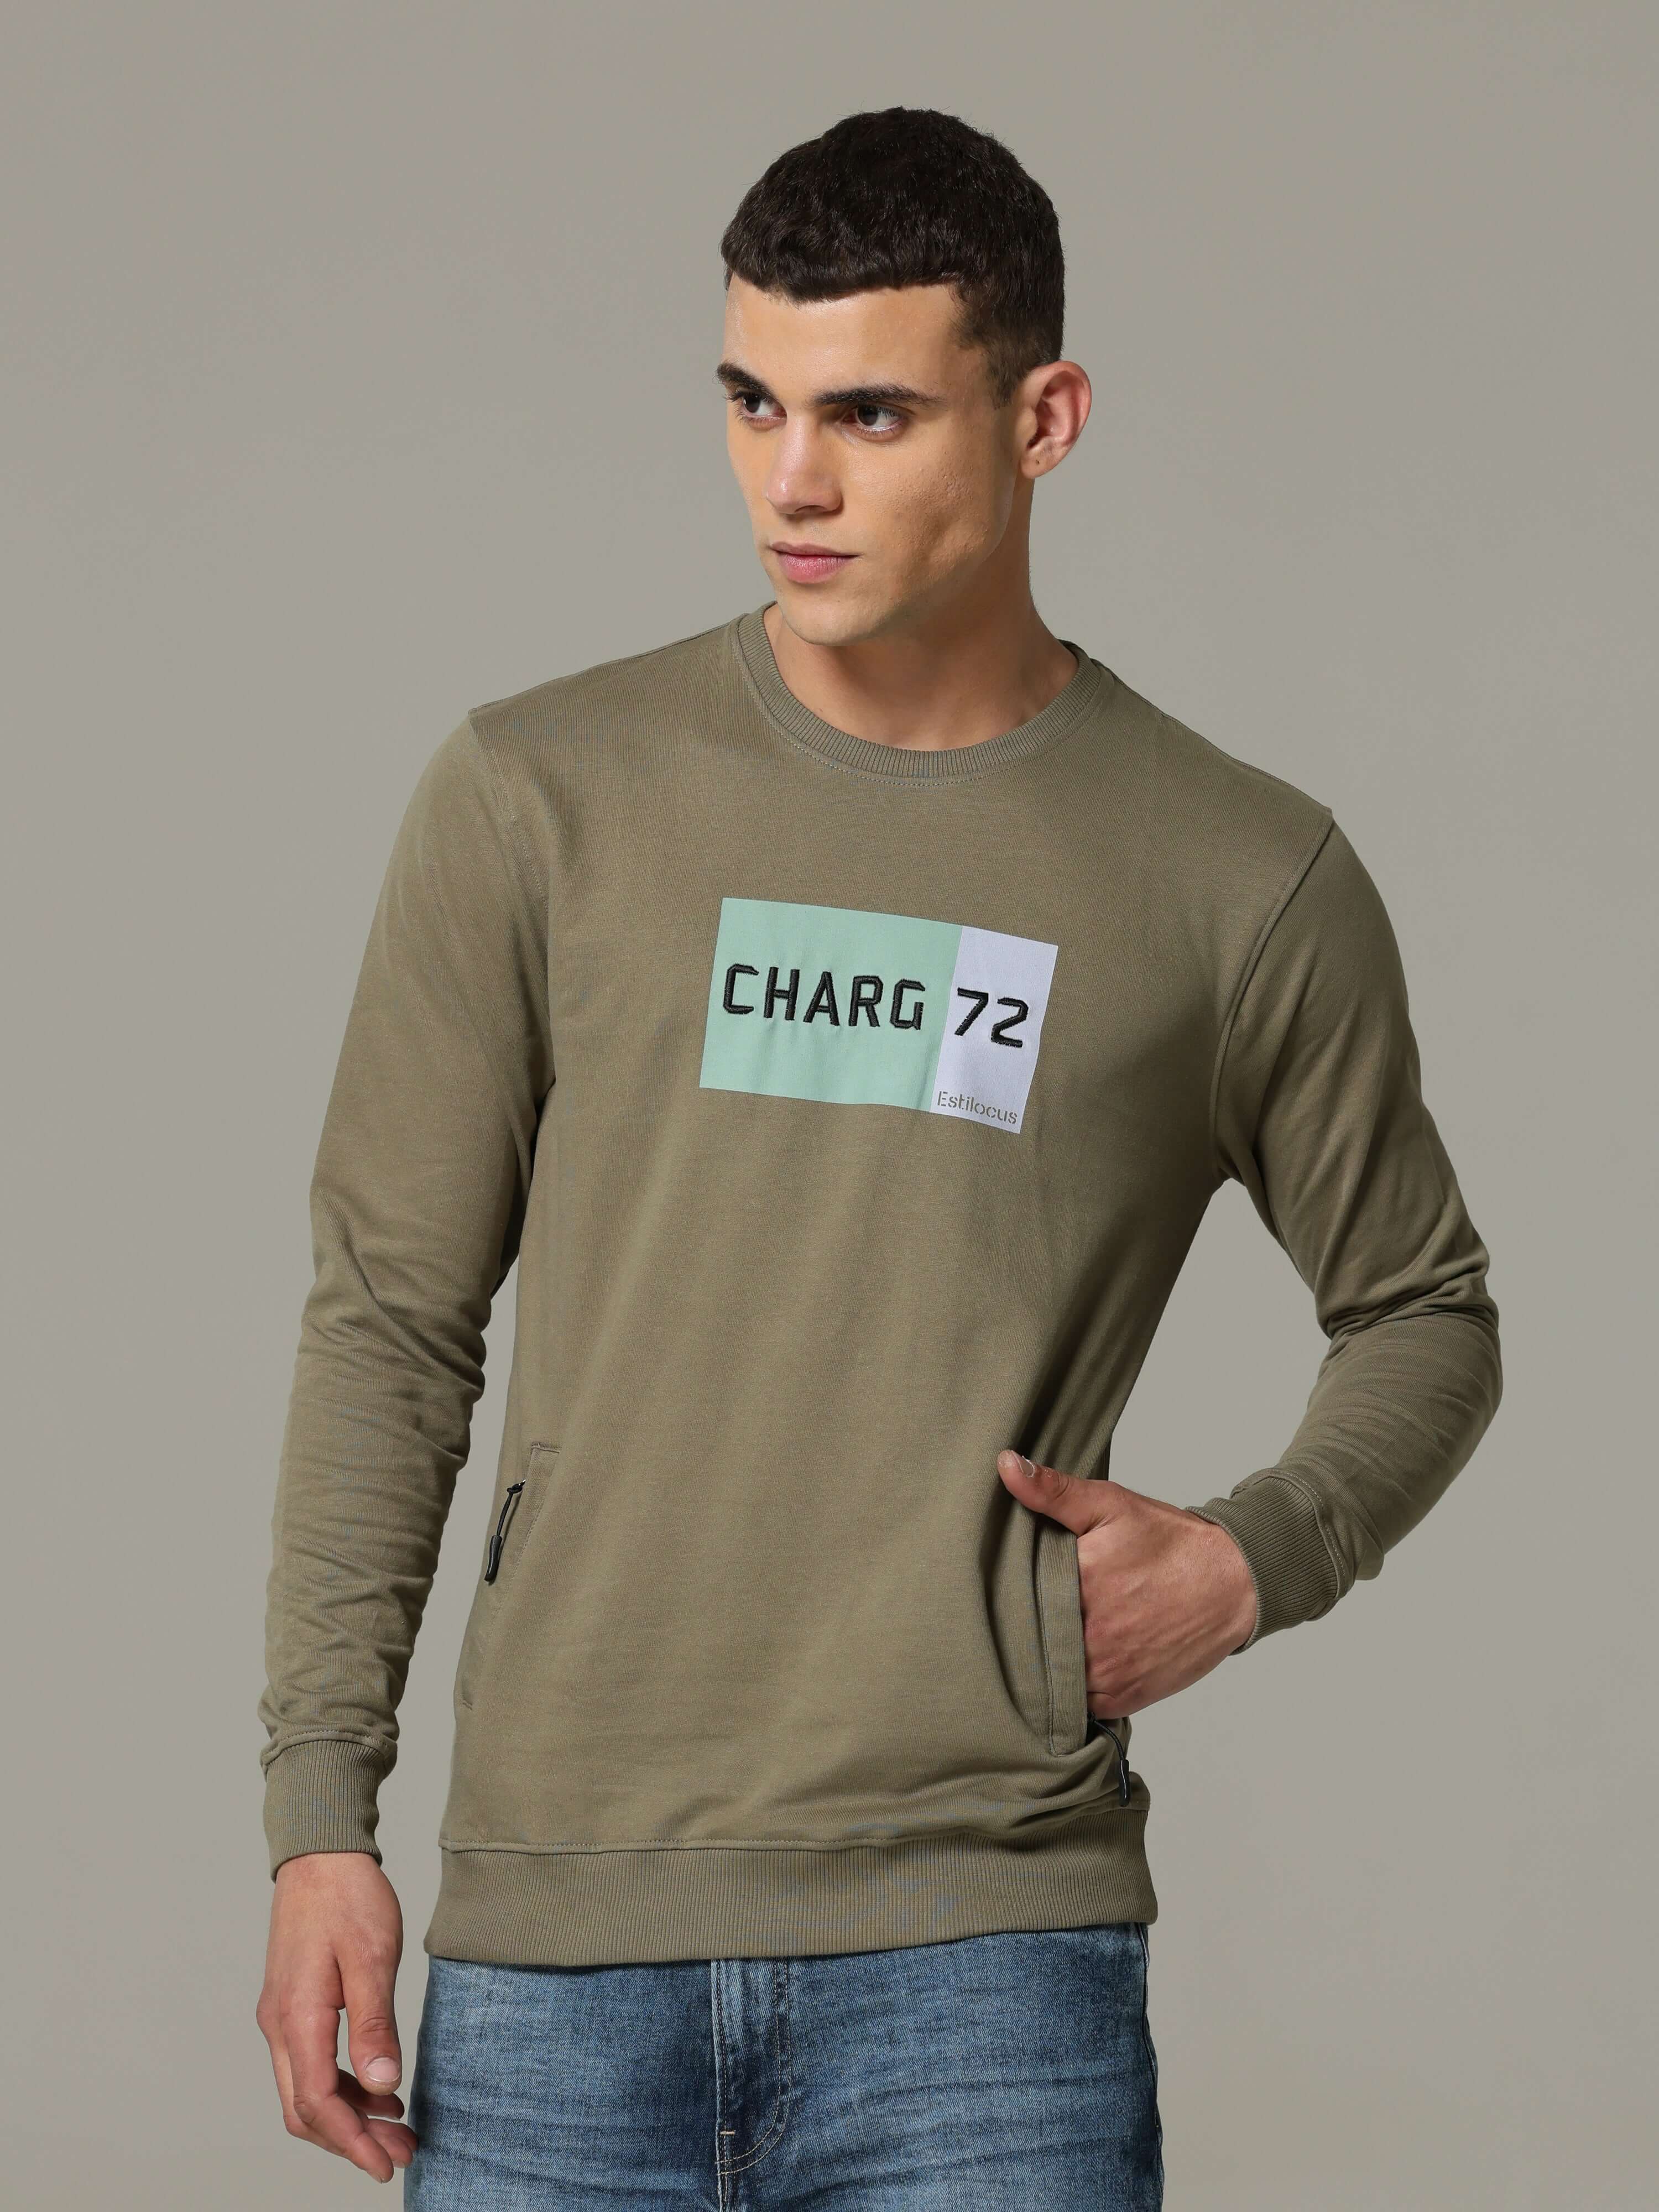 Charg Green Sweat Shirt shop online at Estilocus. • Crew neck • Long sleeve • Ribbing around neckline, Cuff & hem • High quality print and fine embroidery Fit : Comfort fit Size : The model is wearing M size Model height : 6 Feet Wash care : Cold machine